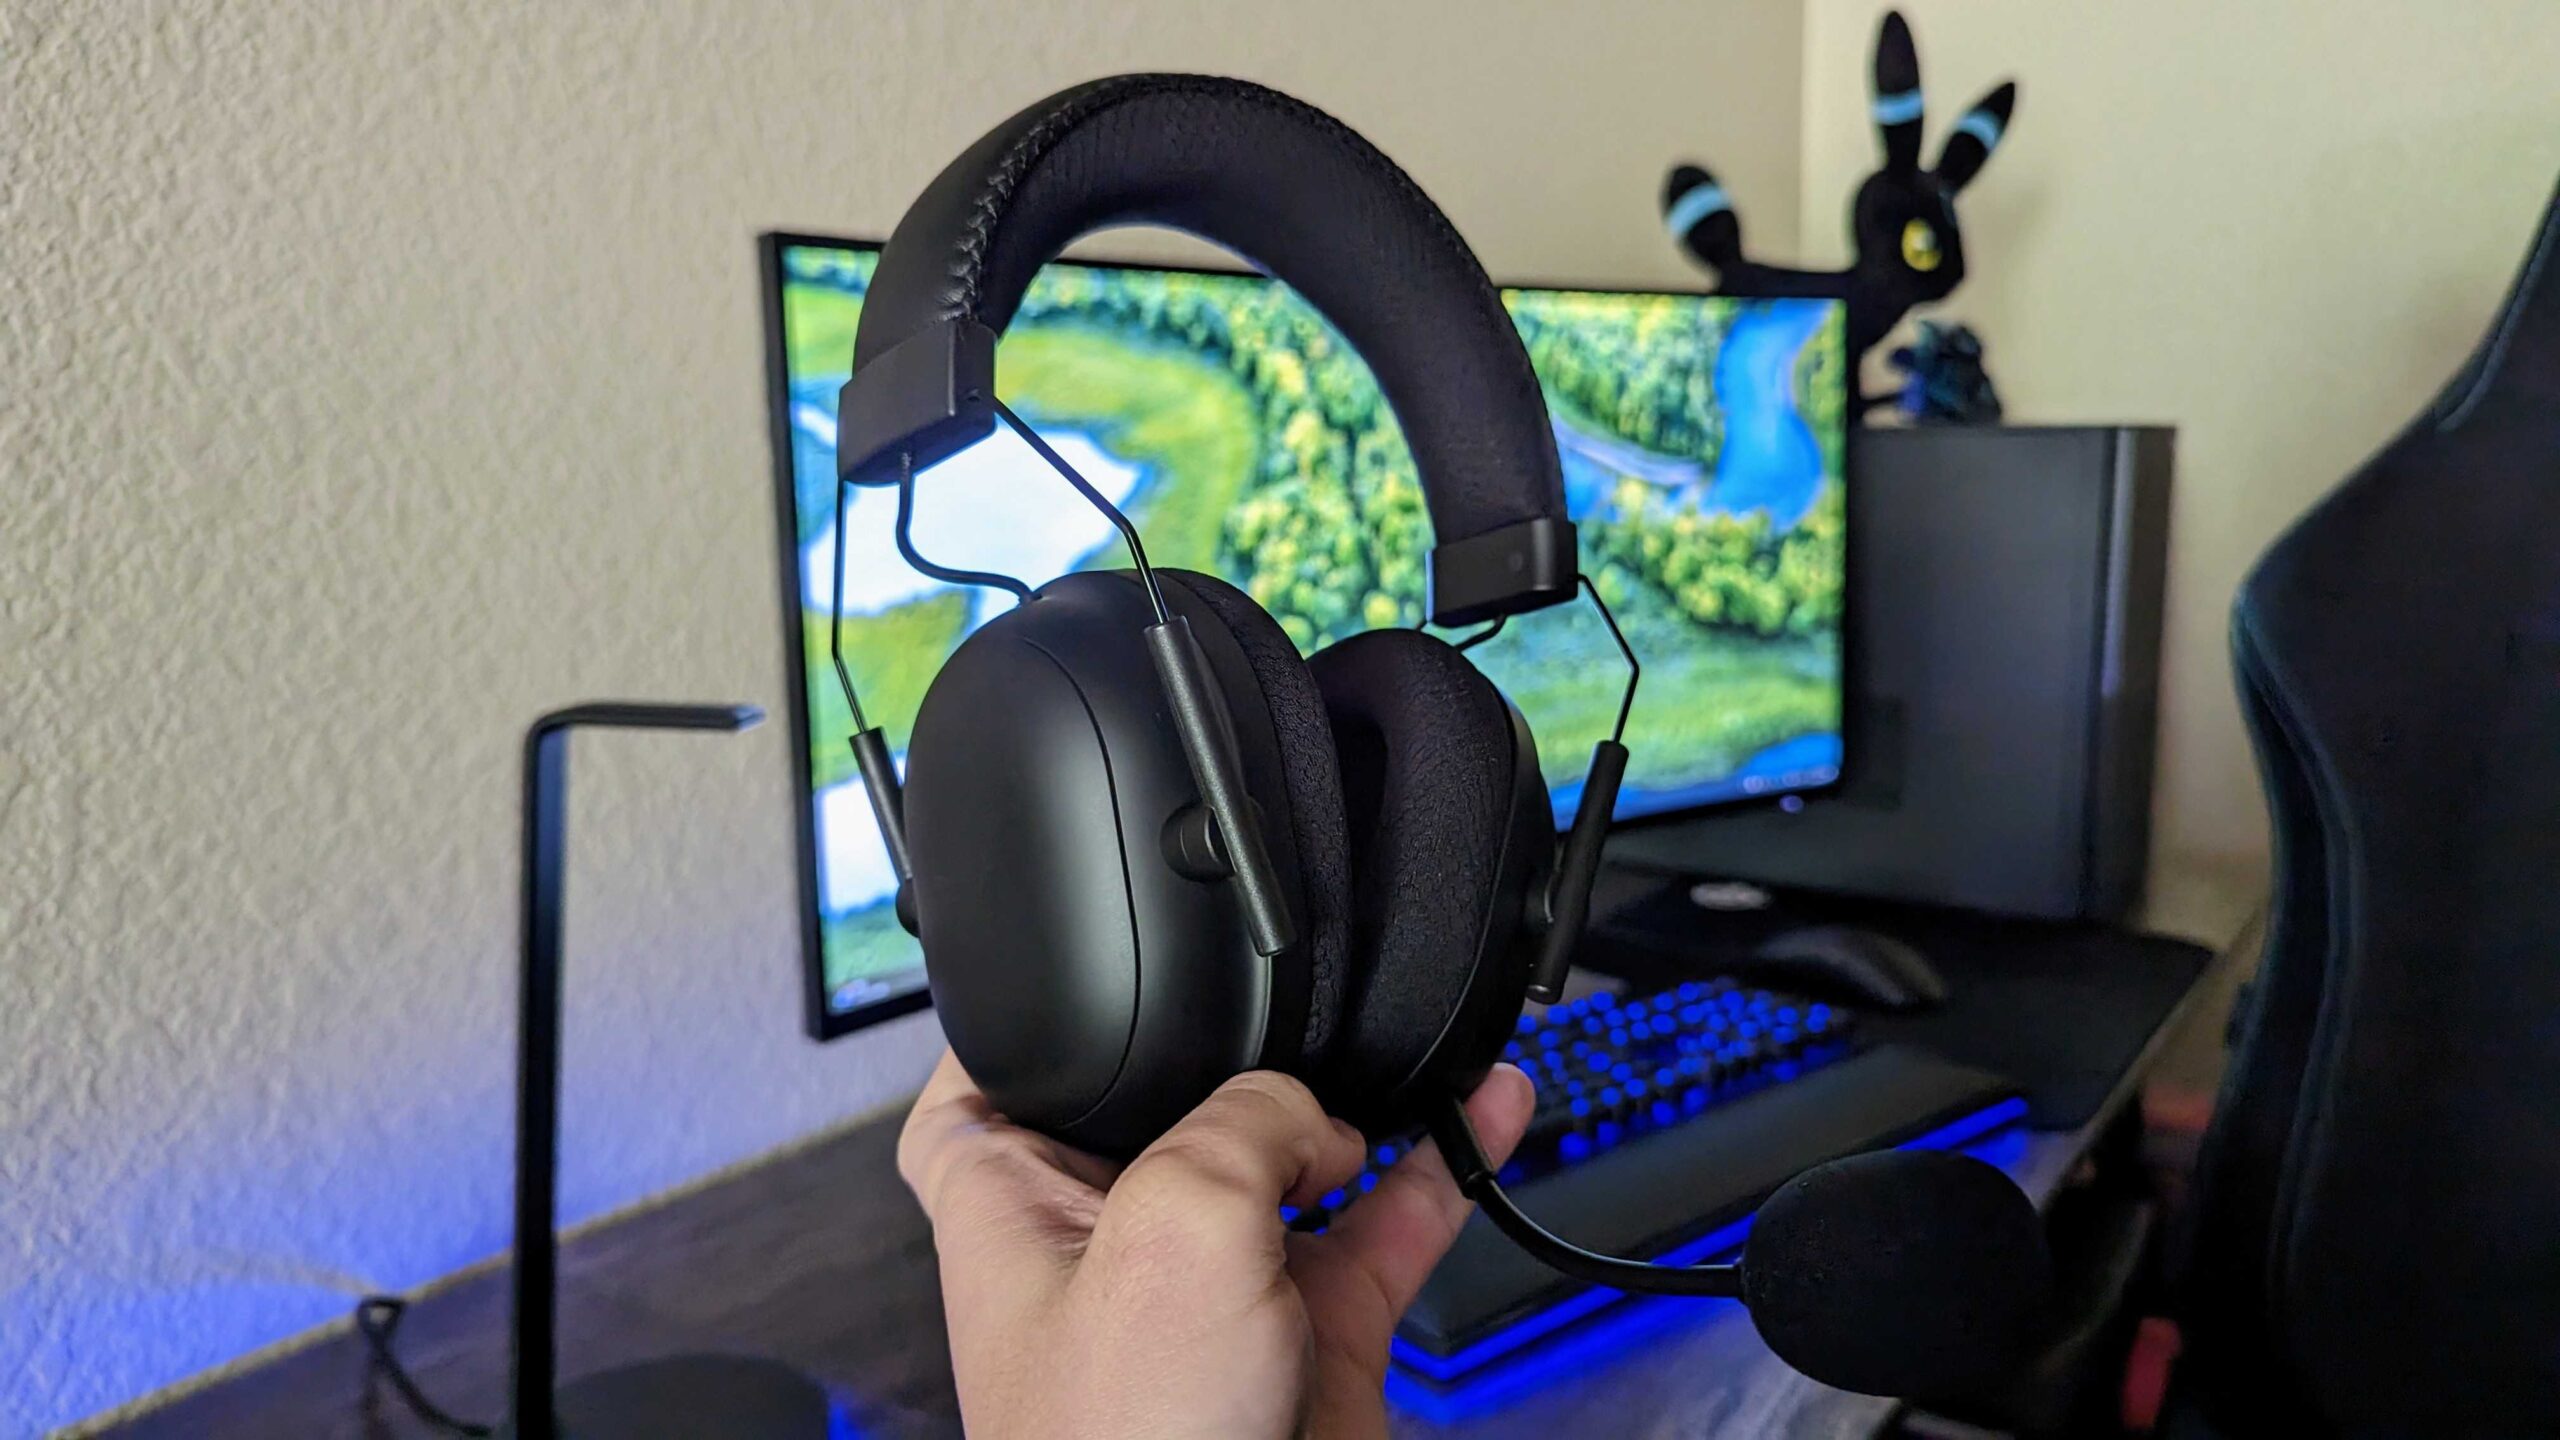 It took me over a month to drain the battery on my favorite gaming headset